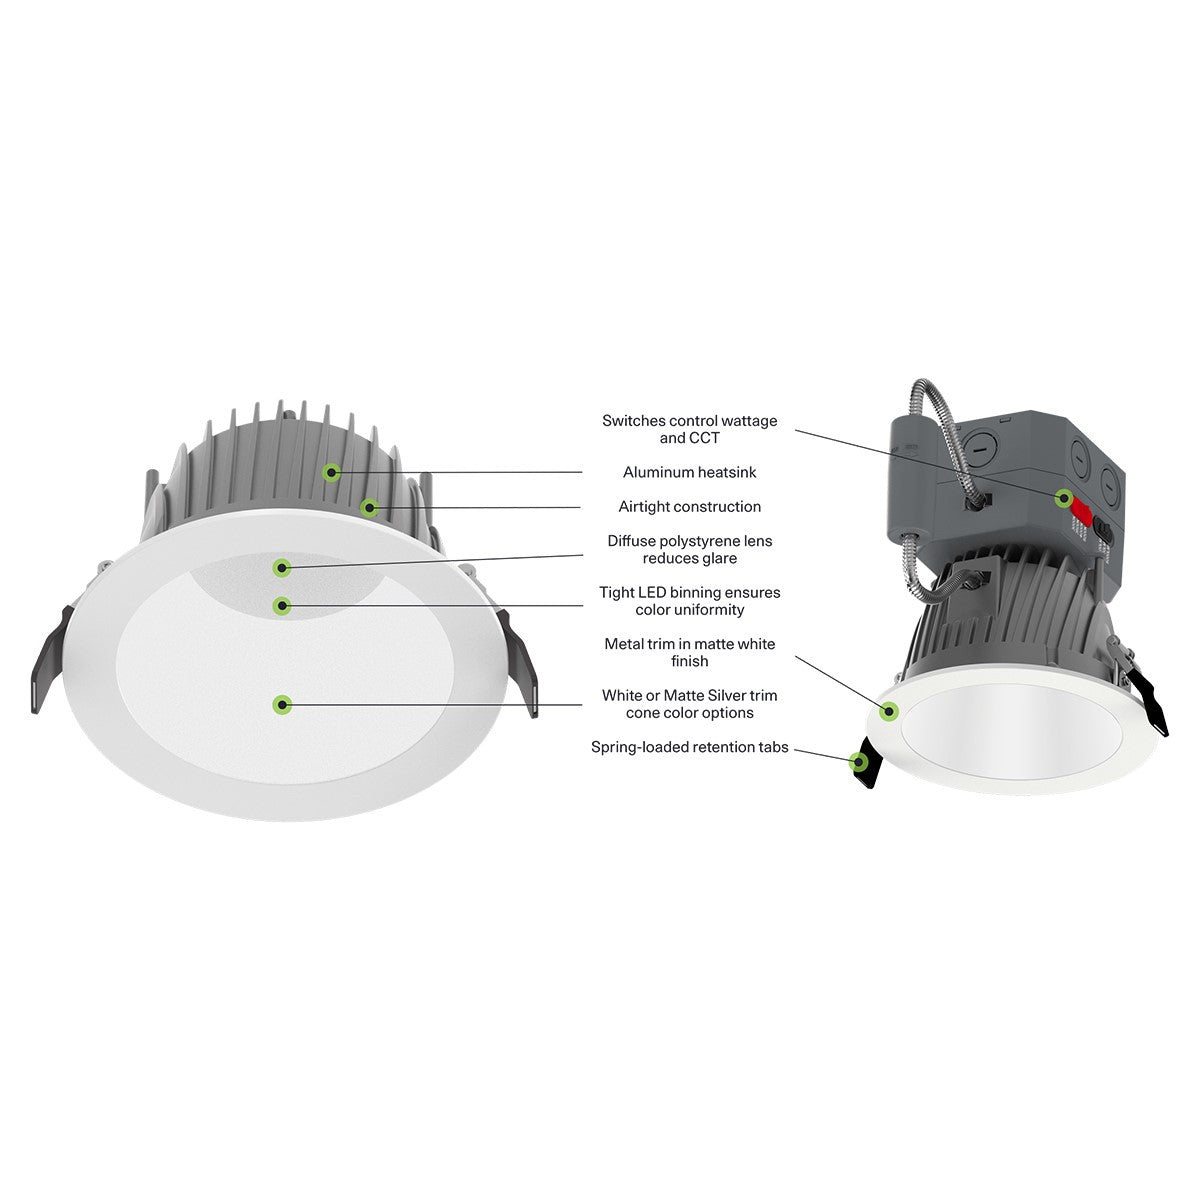 3 Inch LED Deep Regress Commercial Downlight, Field Adjustable 5.5/7.8/8.5W, 430/550/650 Lumens, 30/35/40/50K, Smooth Trim, White Finish